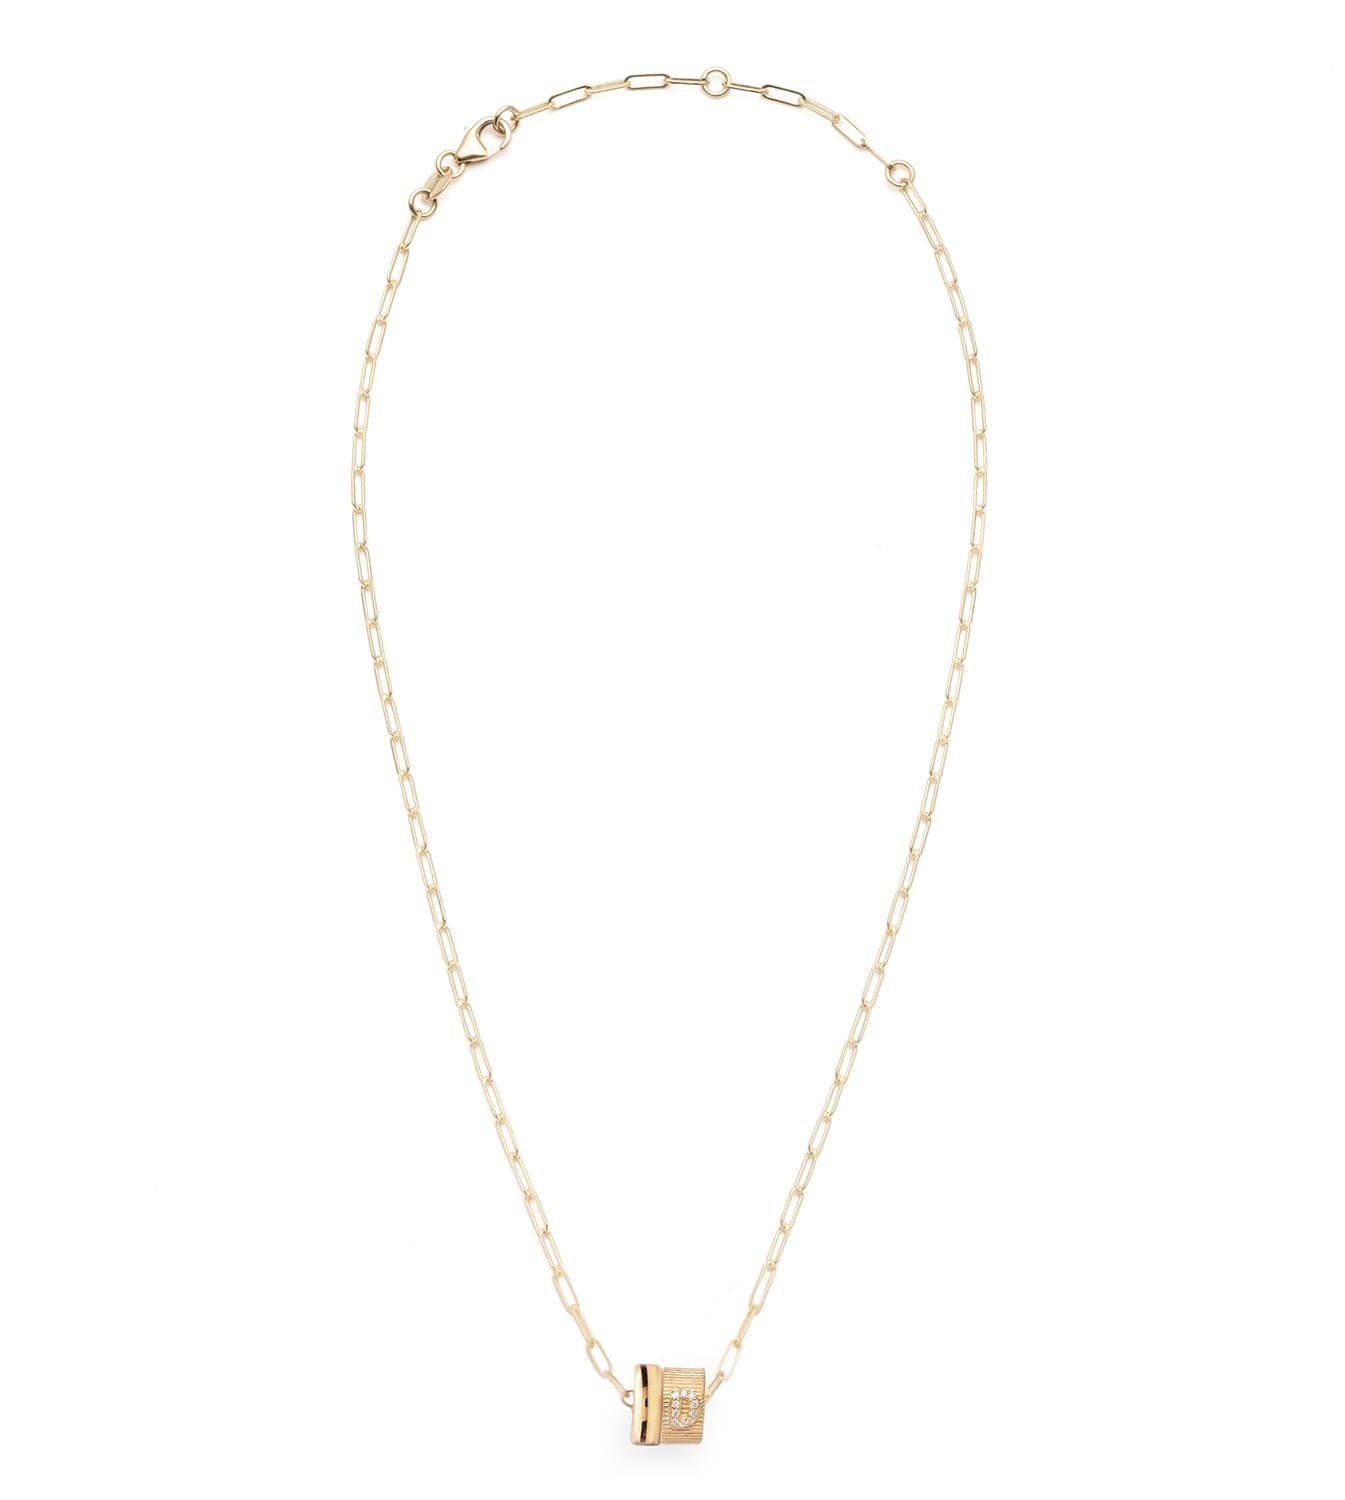 Pave Diamond Initial & Chubby Gold : Heart Beat Super Fine Clip Chain Necklace